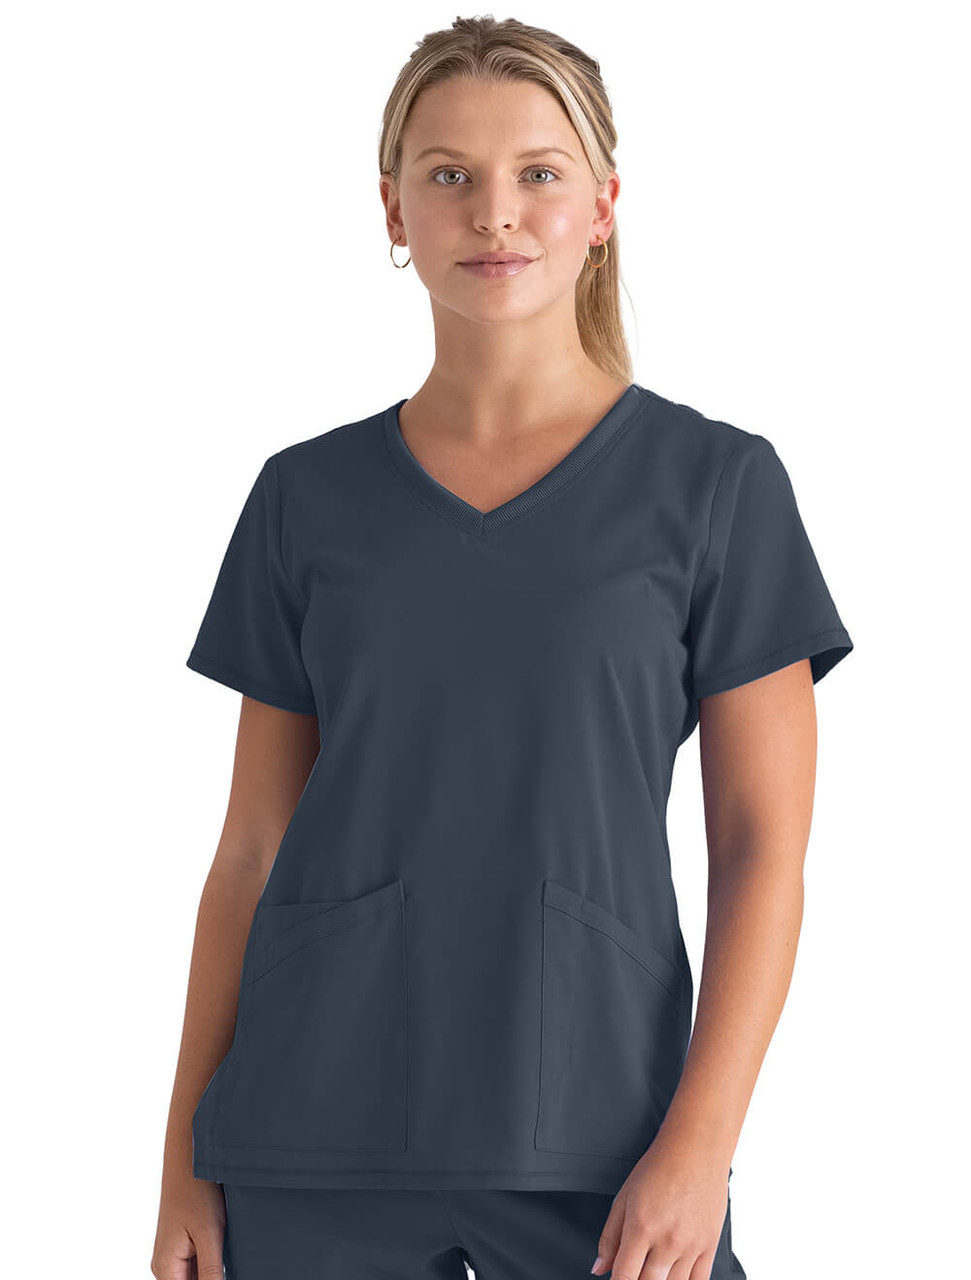 Clearance Spandex Stretch by Grey's Anatomy Women's Comfort V-Neck